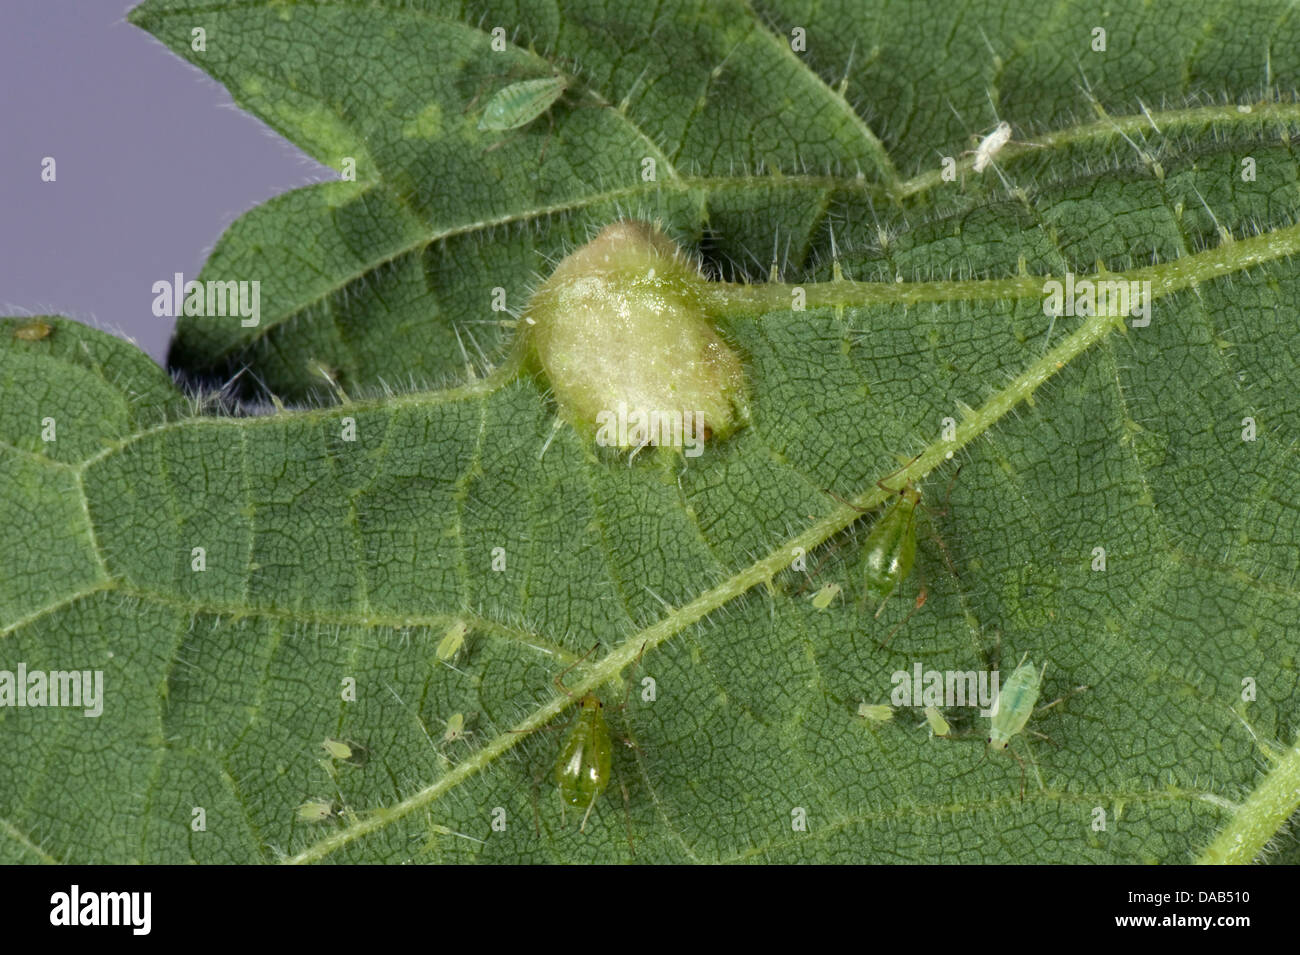 Nettle leaf gall caused by a midge, Dasineura urticae, on the underside of a stinging nettle, Urtica dioica, leaf Stock Photo